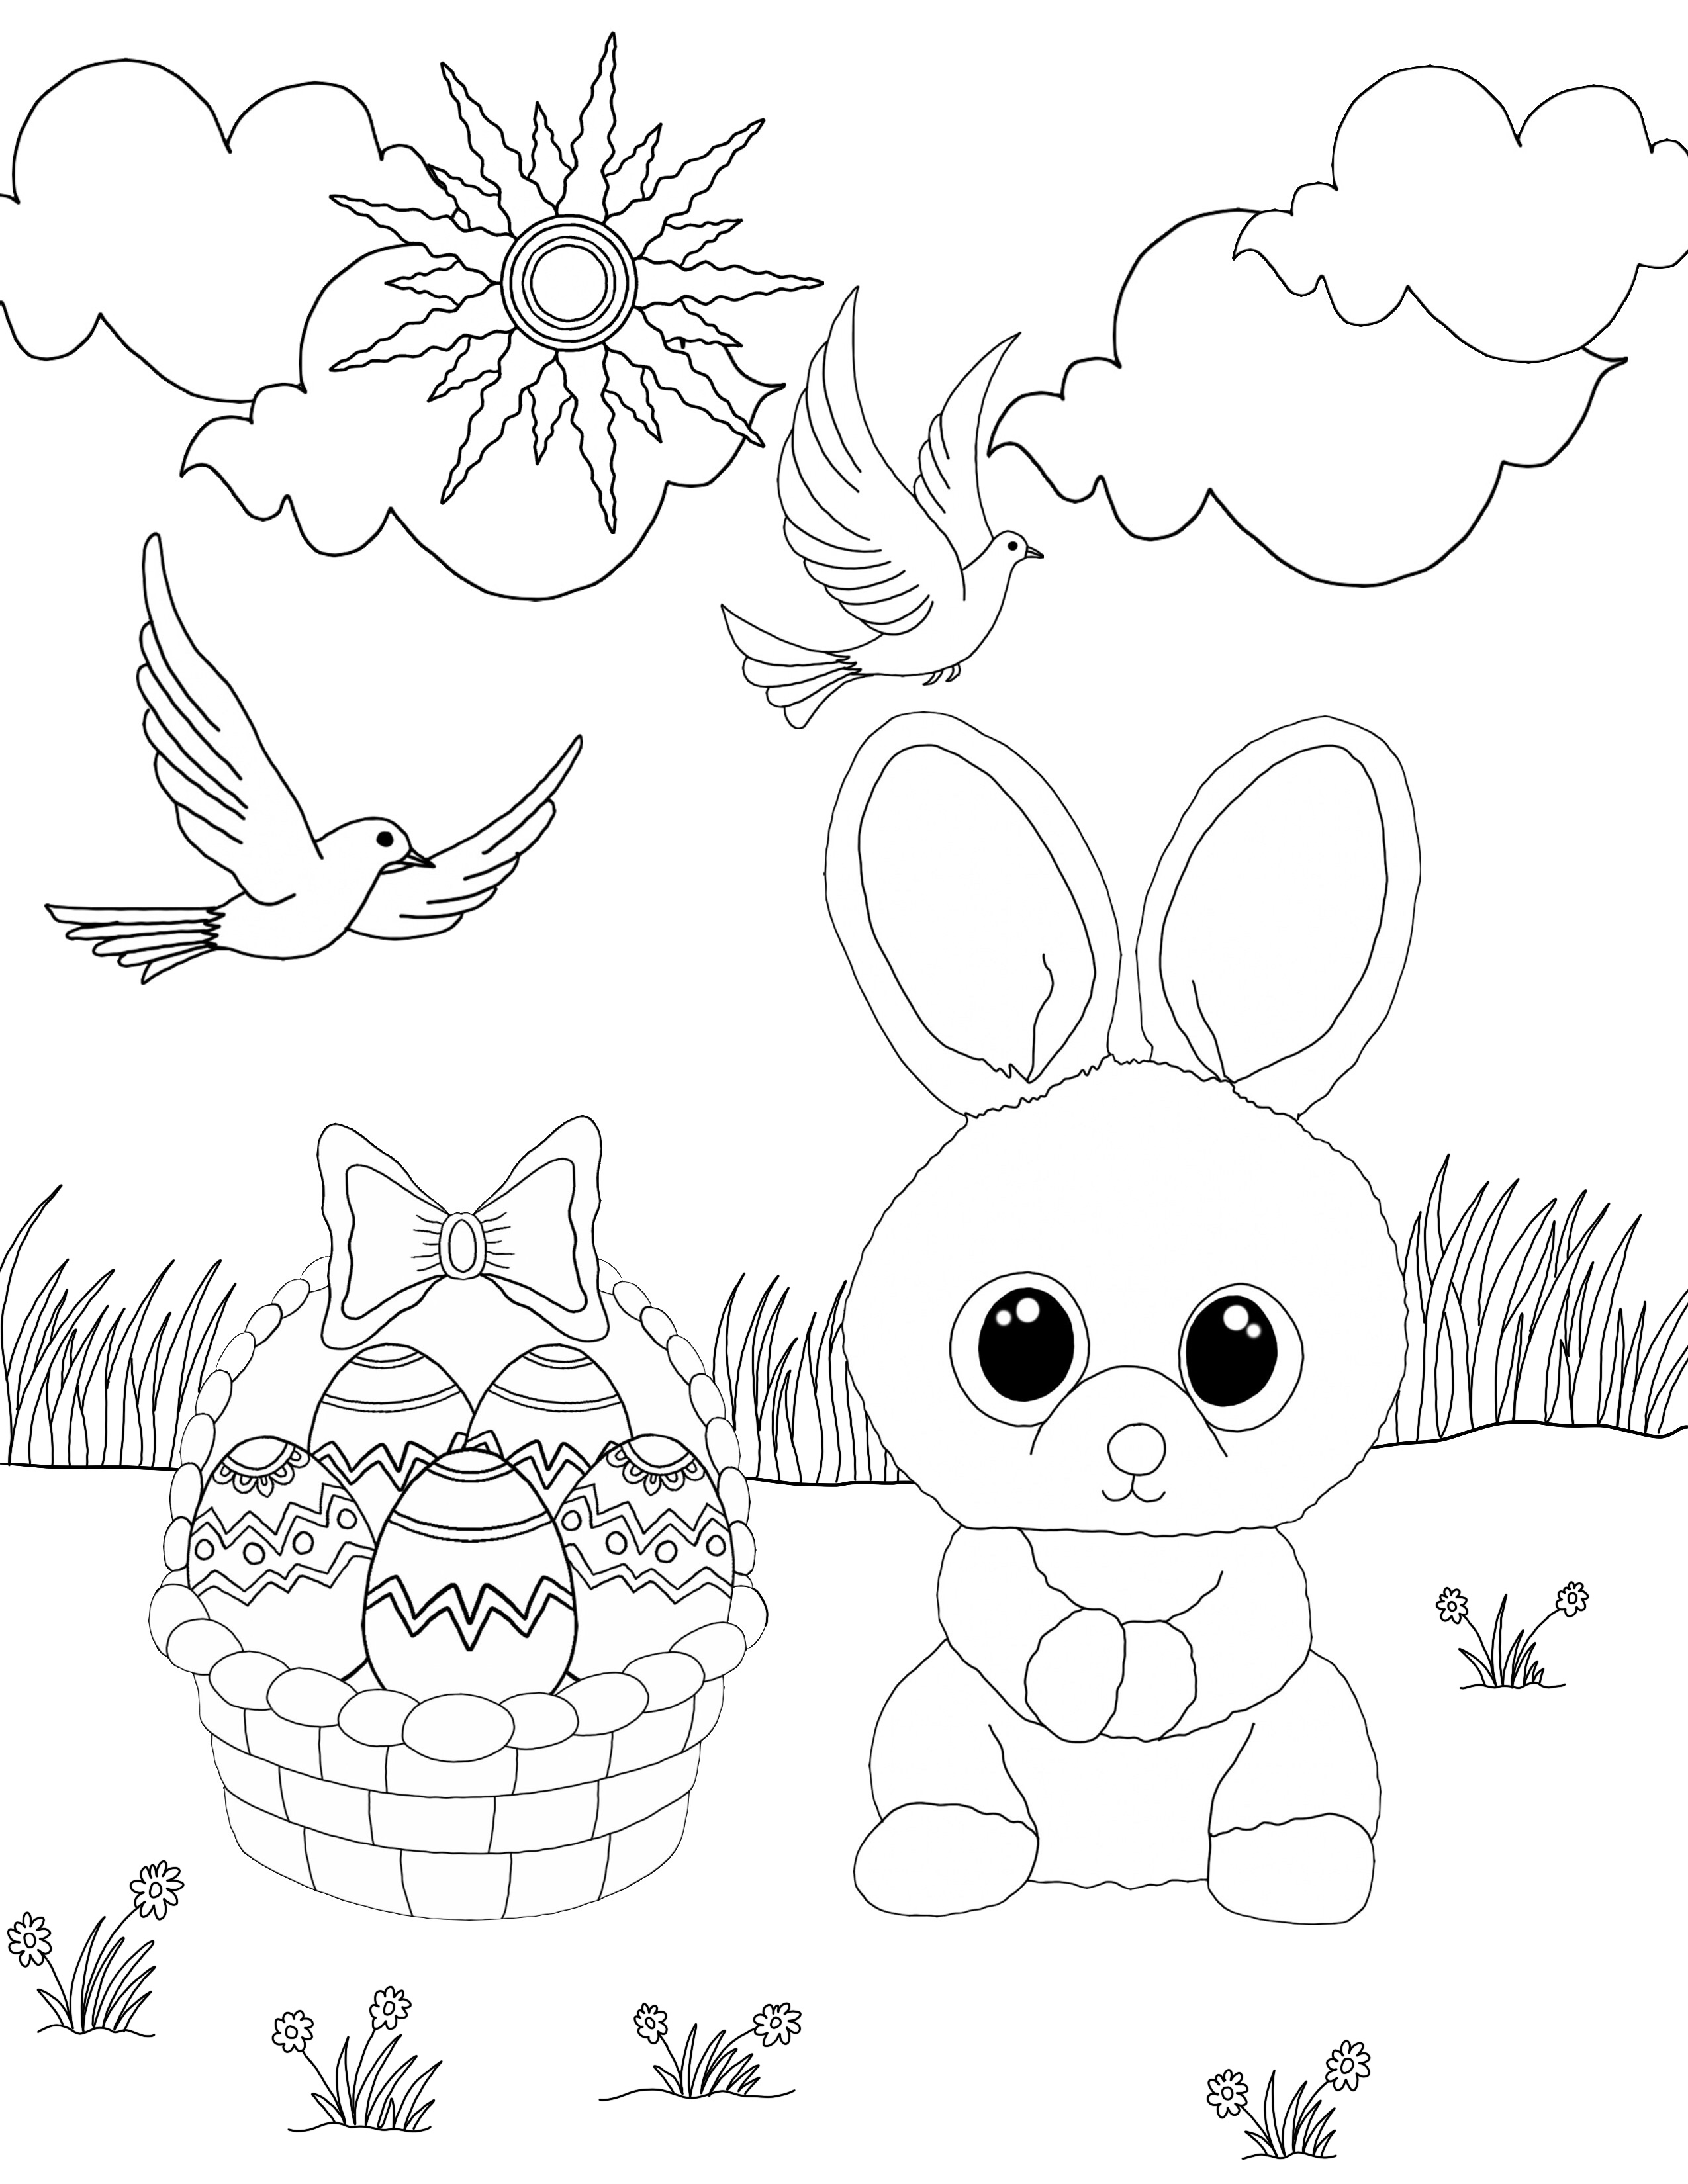 Empty tomb clipart kid. Coloring pages resurrection page